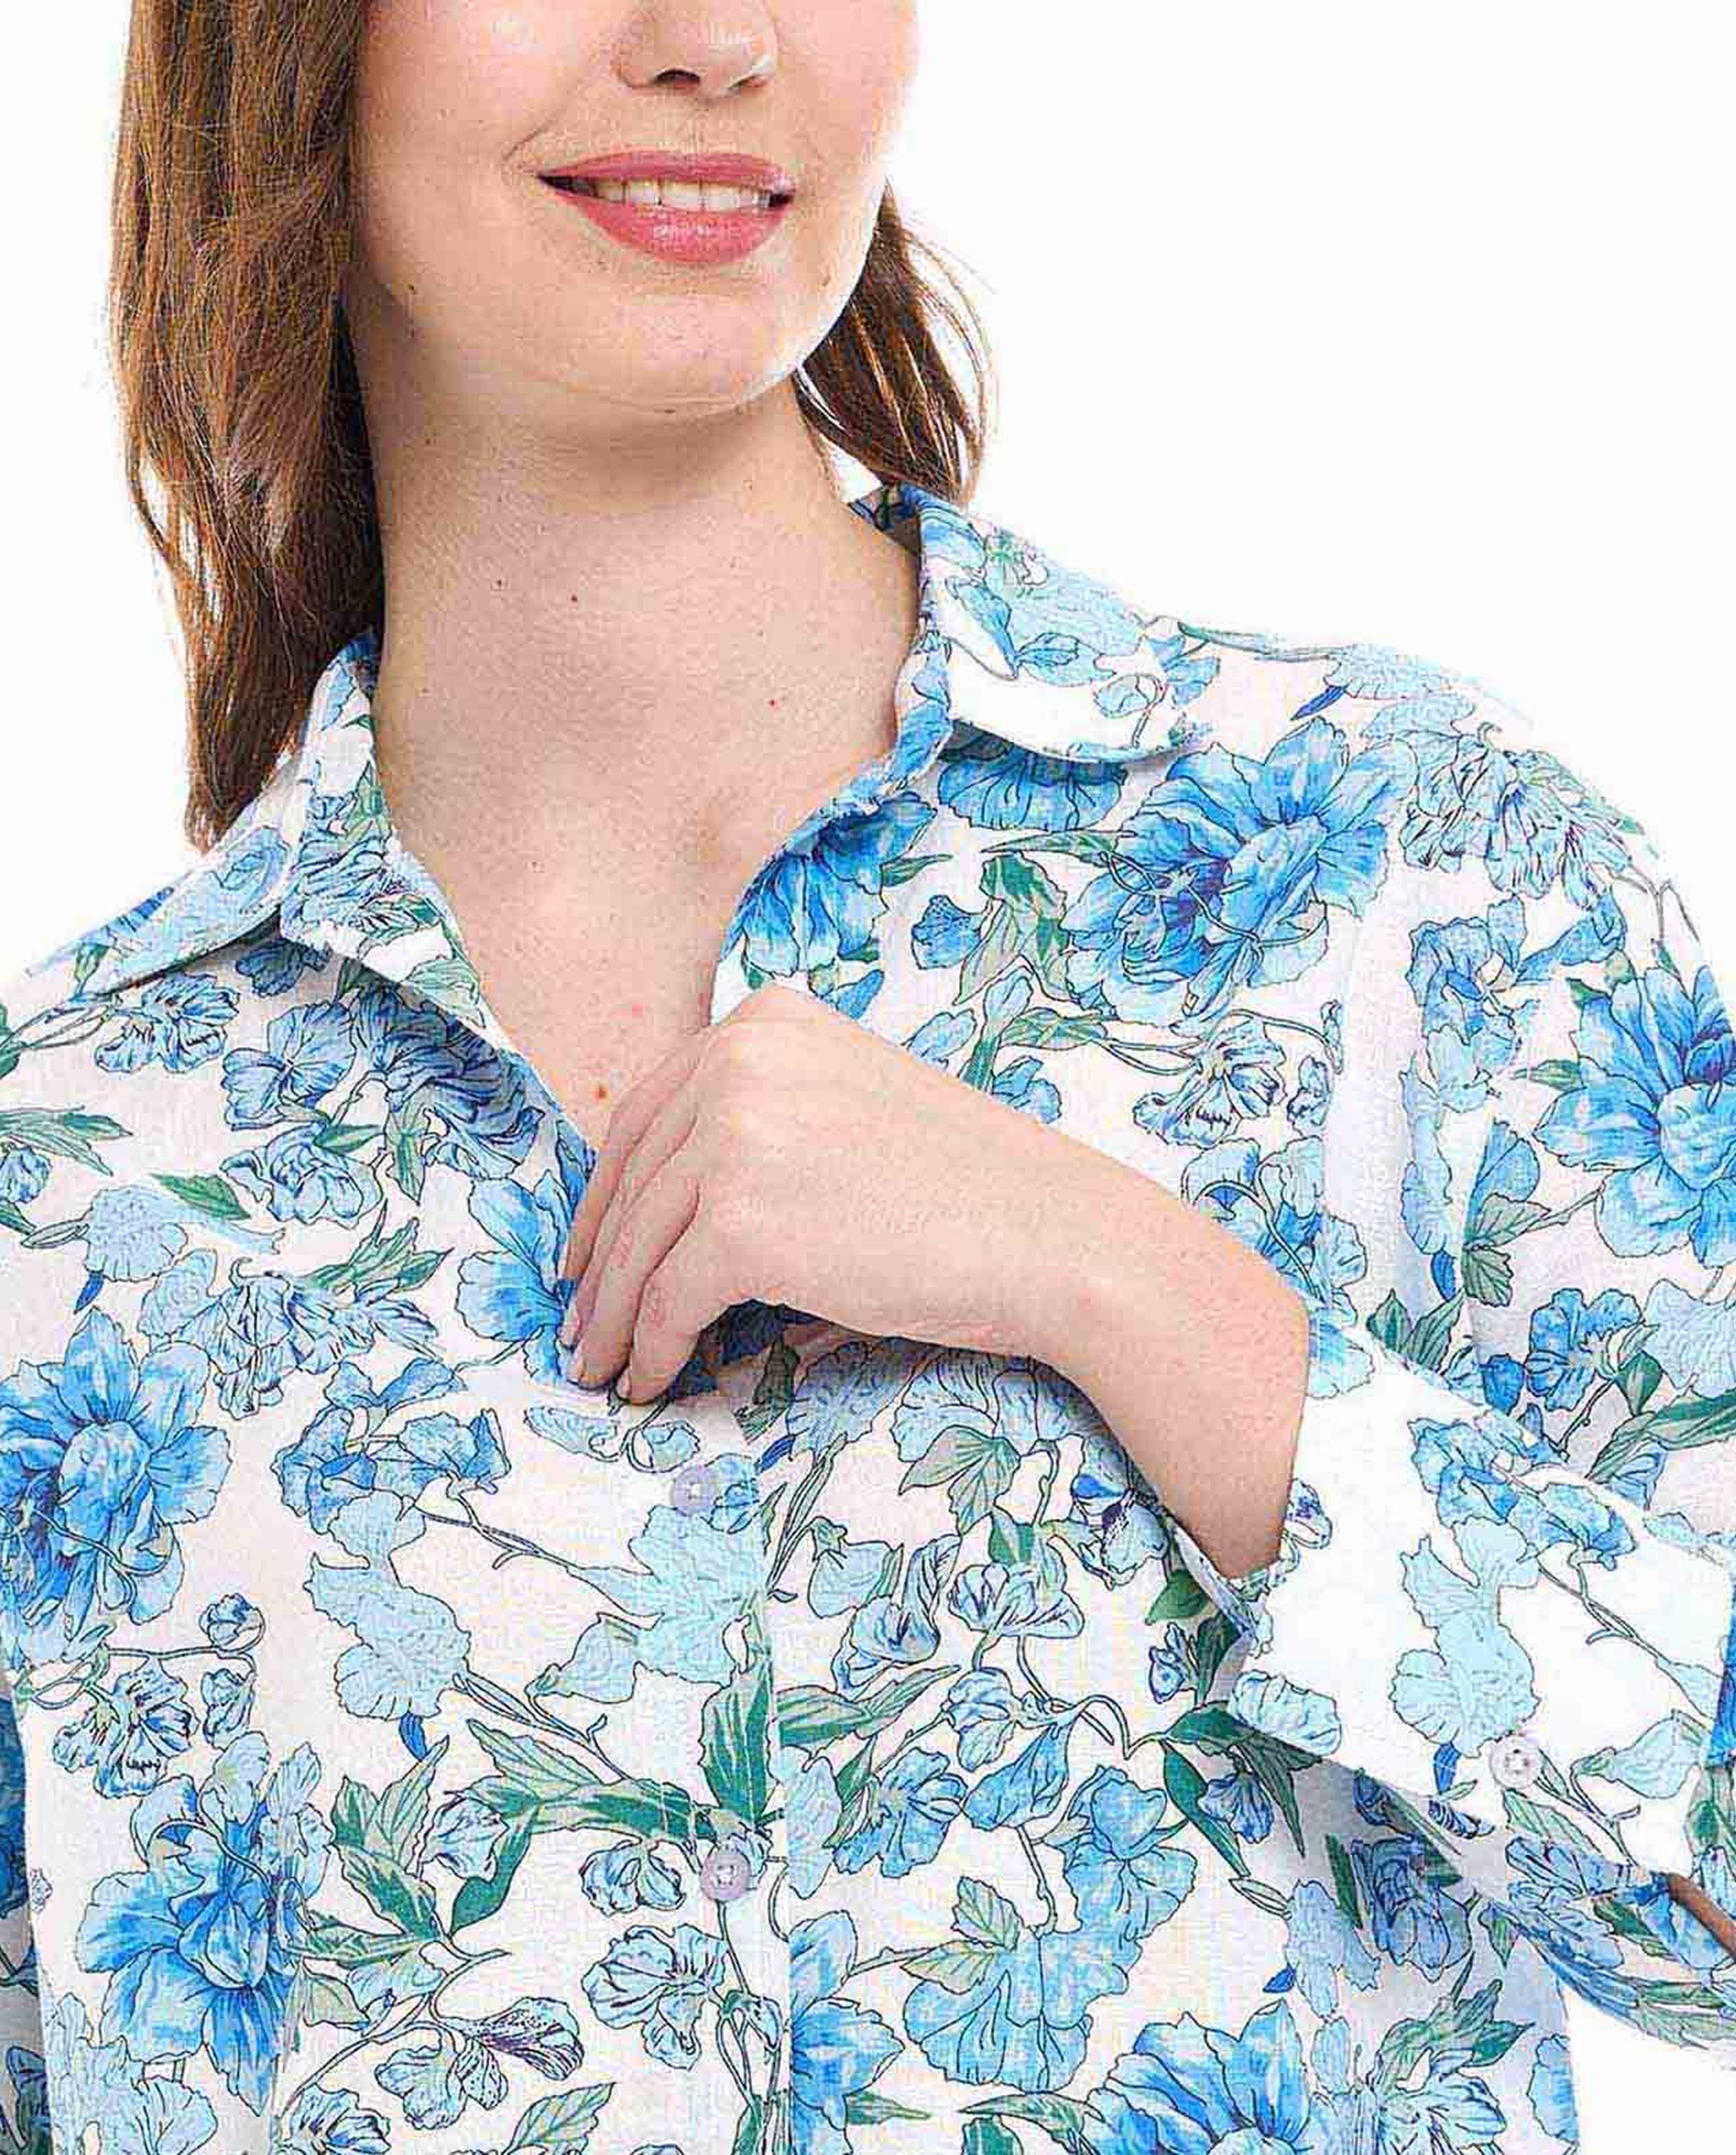 Floral Print Shirt with Classic Collar and Long Sleeves